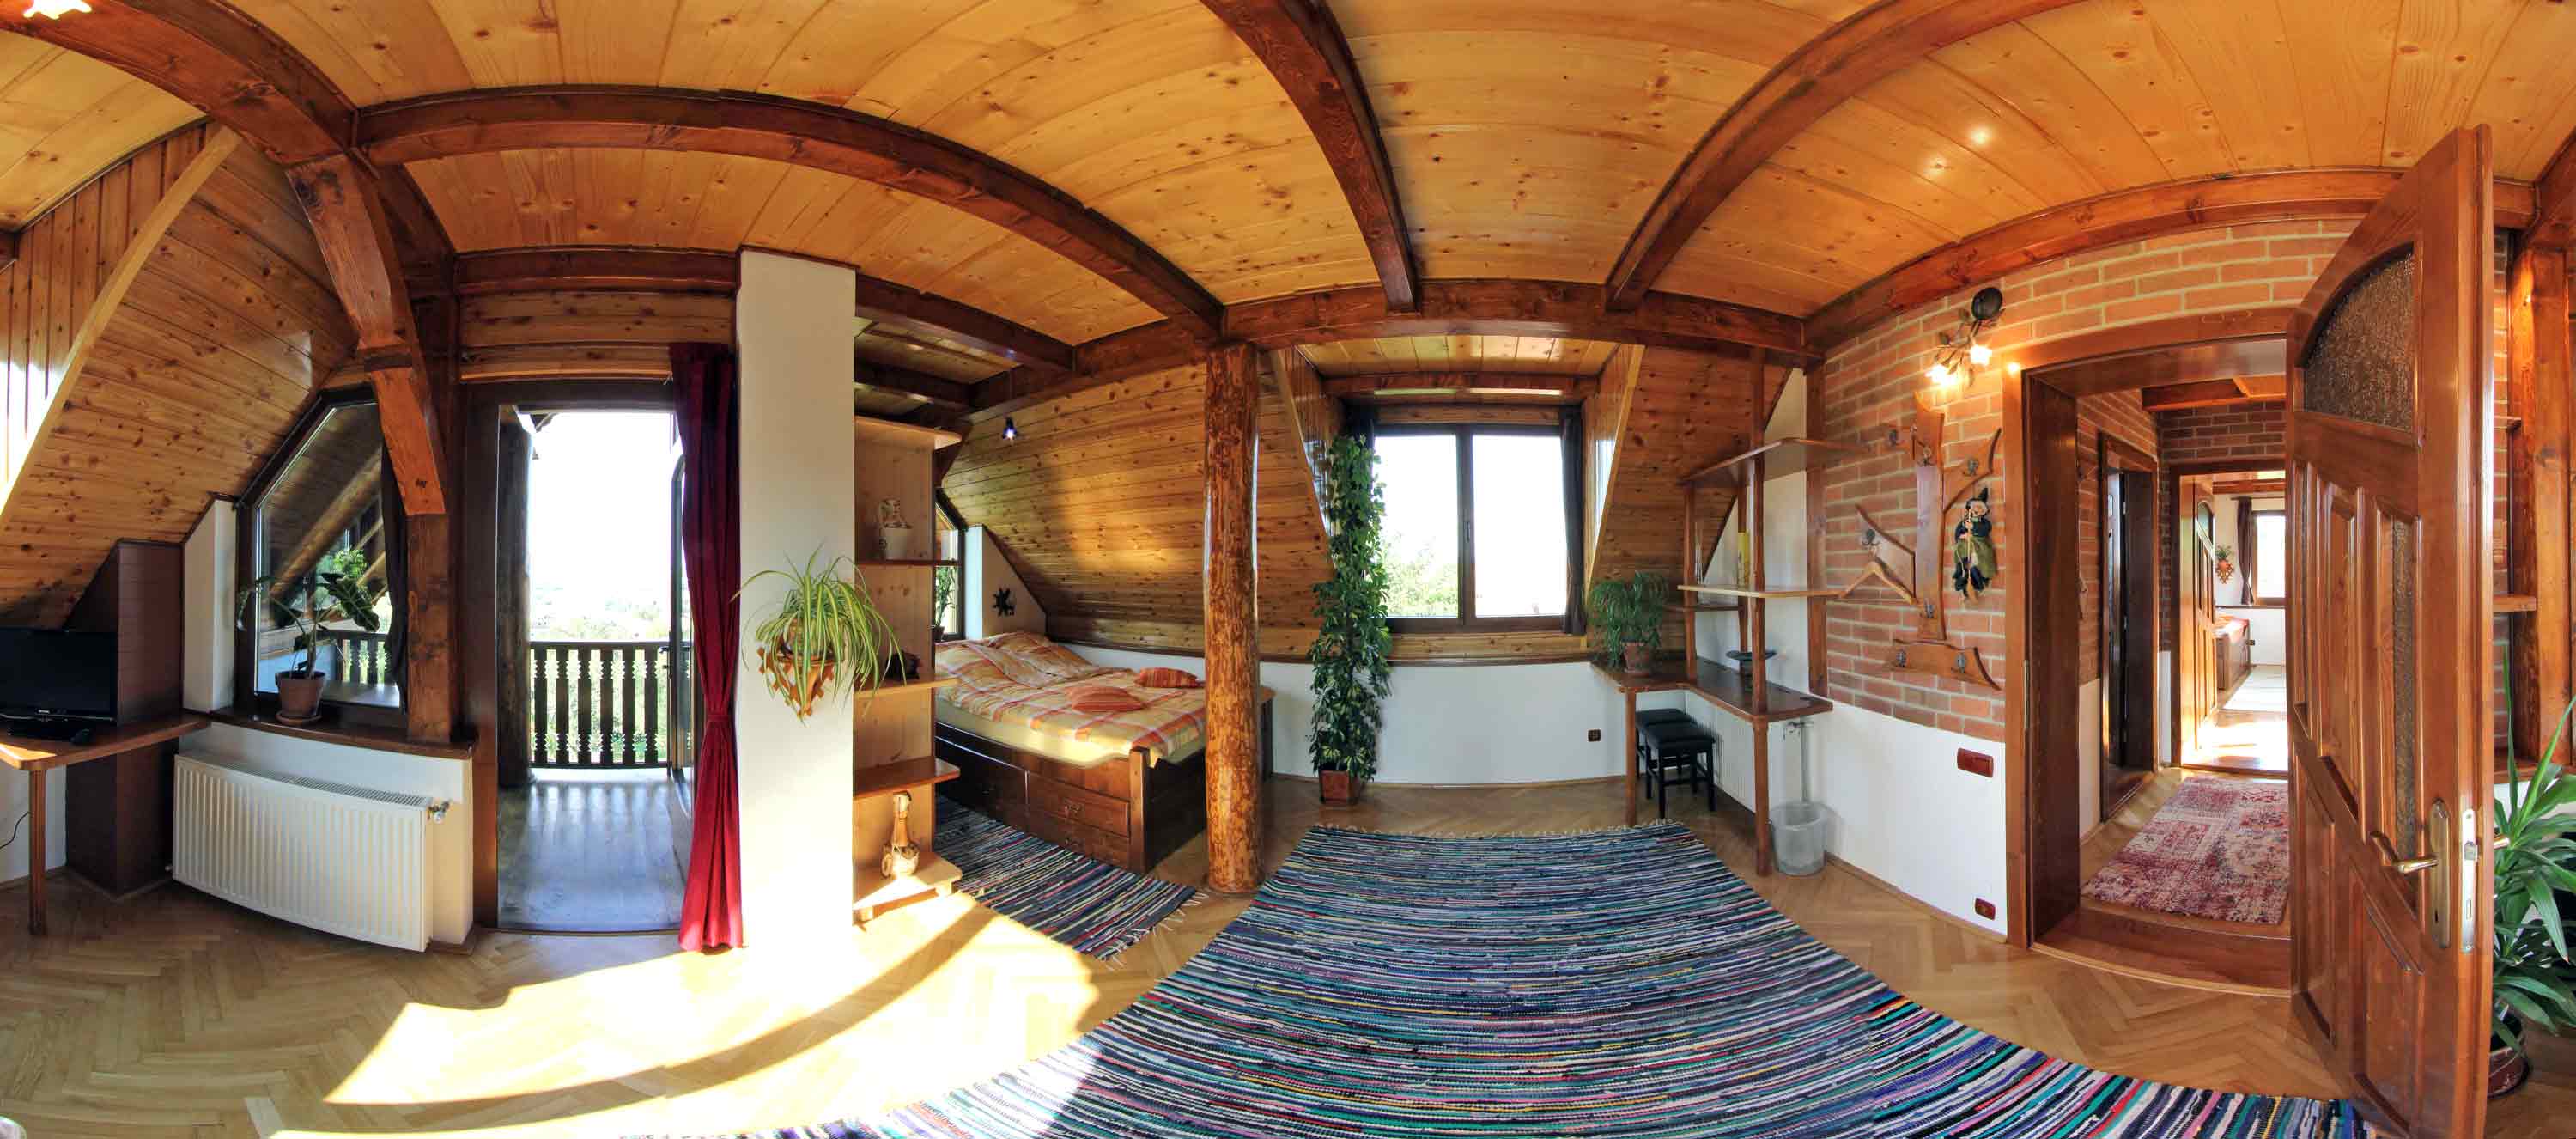 self catering transylvania chalet for rent